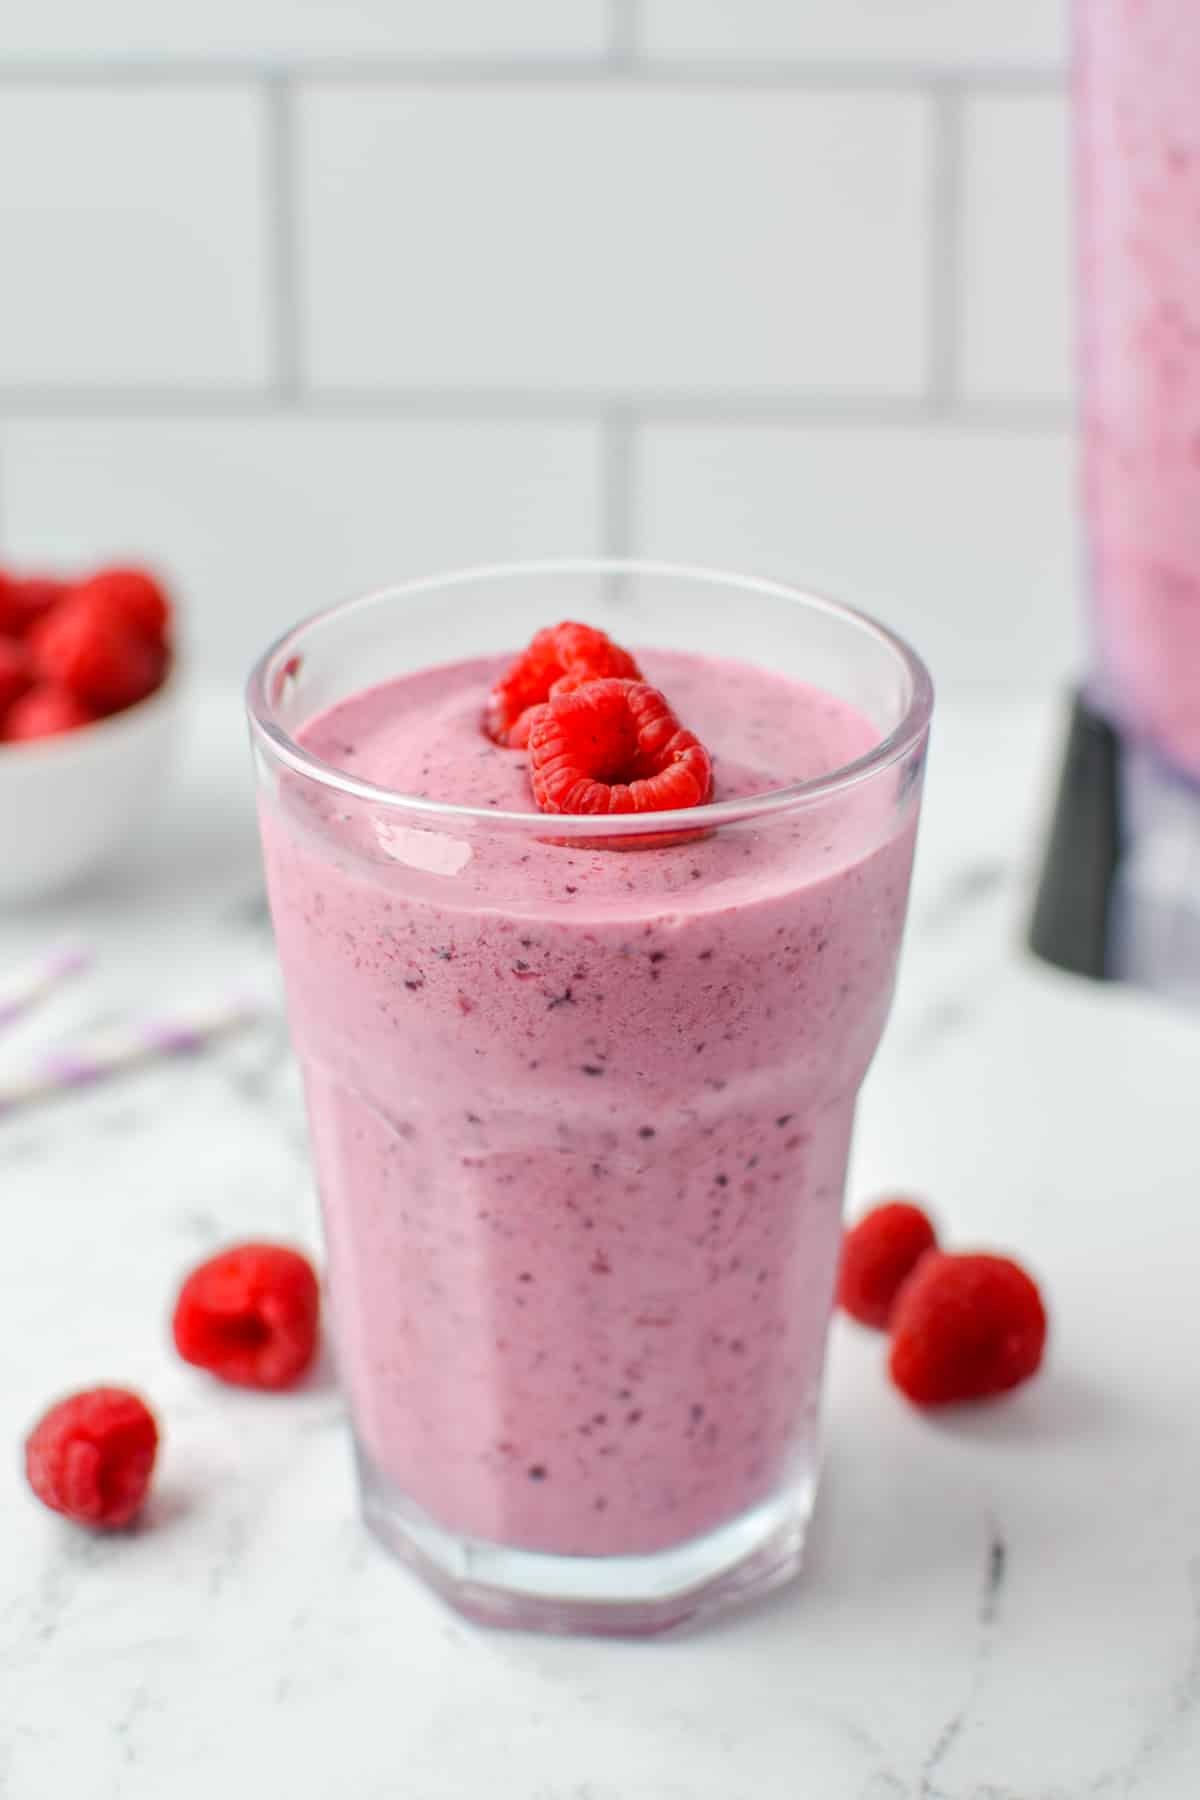 A glass filled with a smoothie and topped with fresh raspberries.